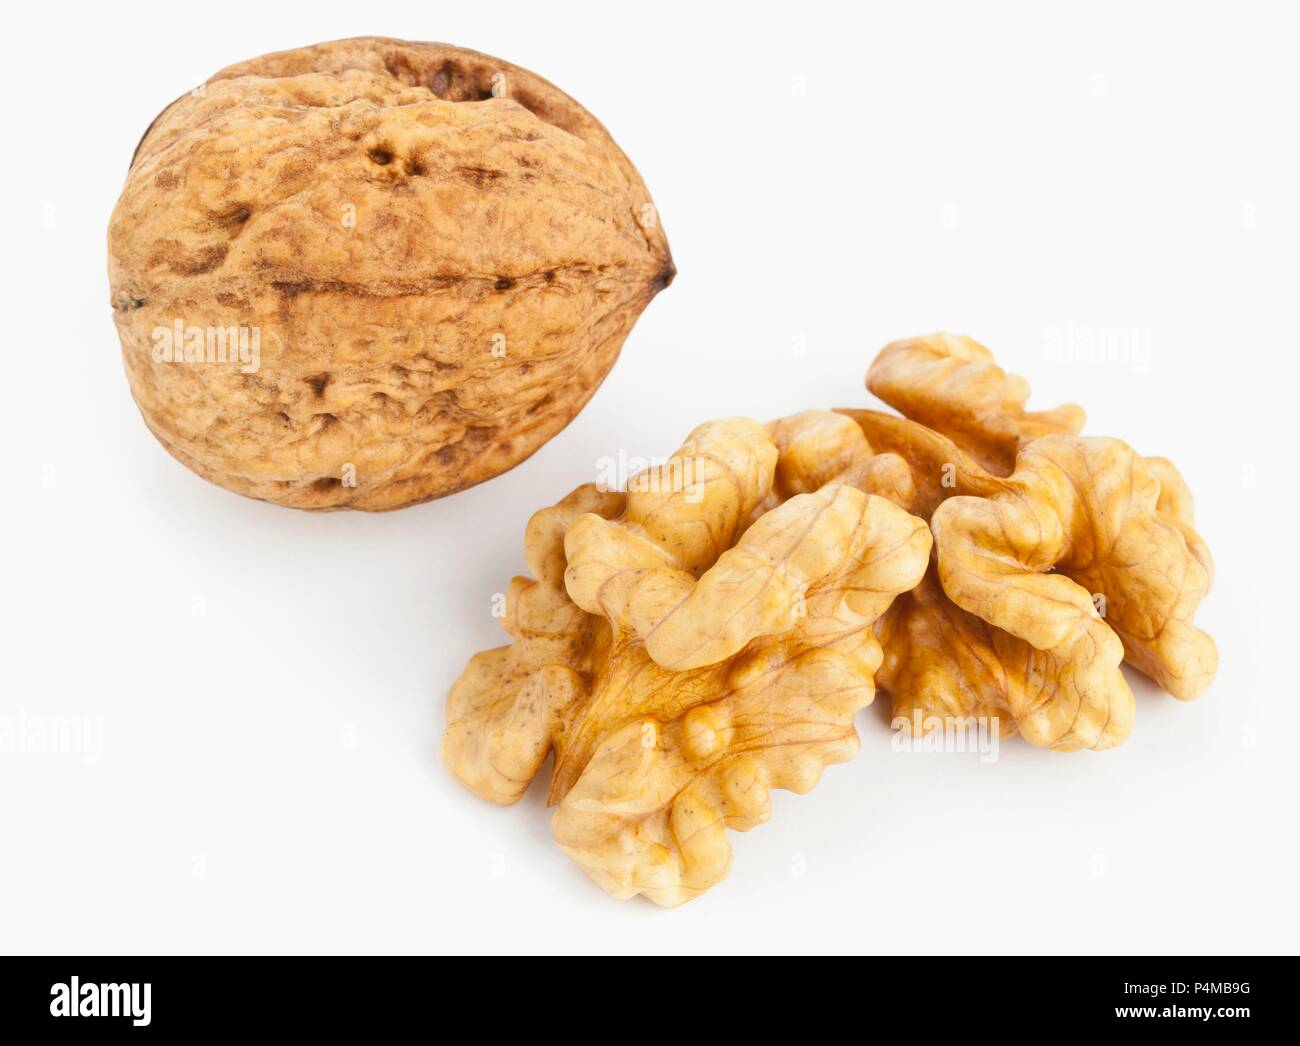 A whole walnut in its shell and two walnut halves Stock Photo